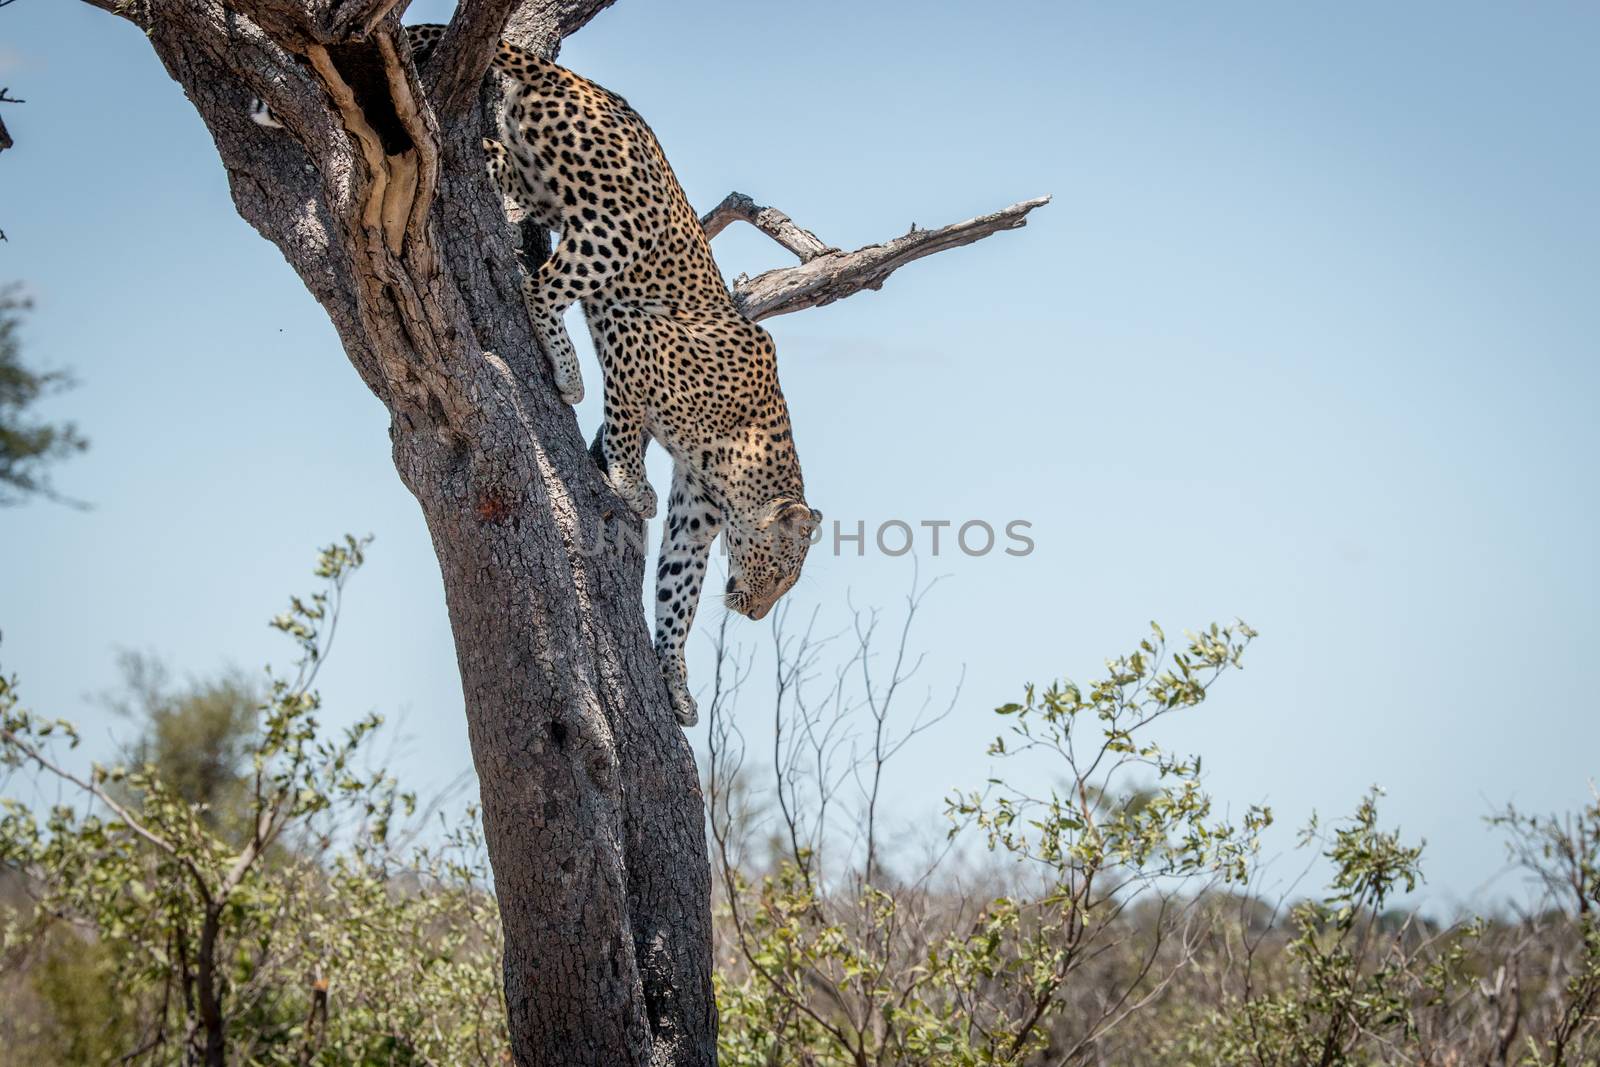 Leopard climbing out of a tree in the Kruger National Park, South Africa.